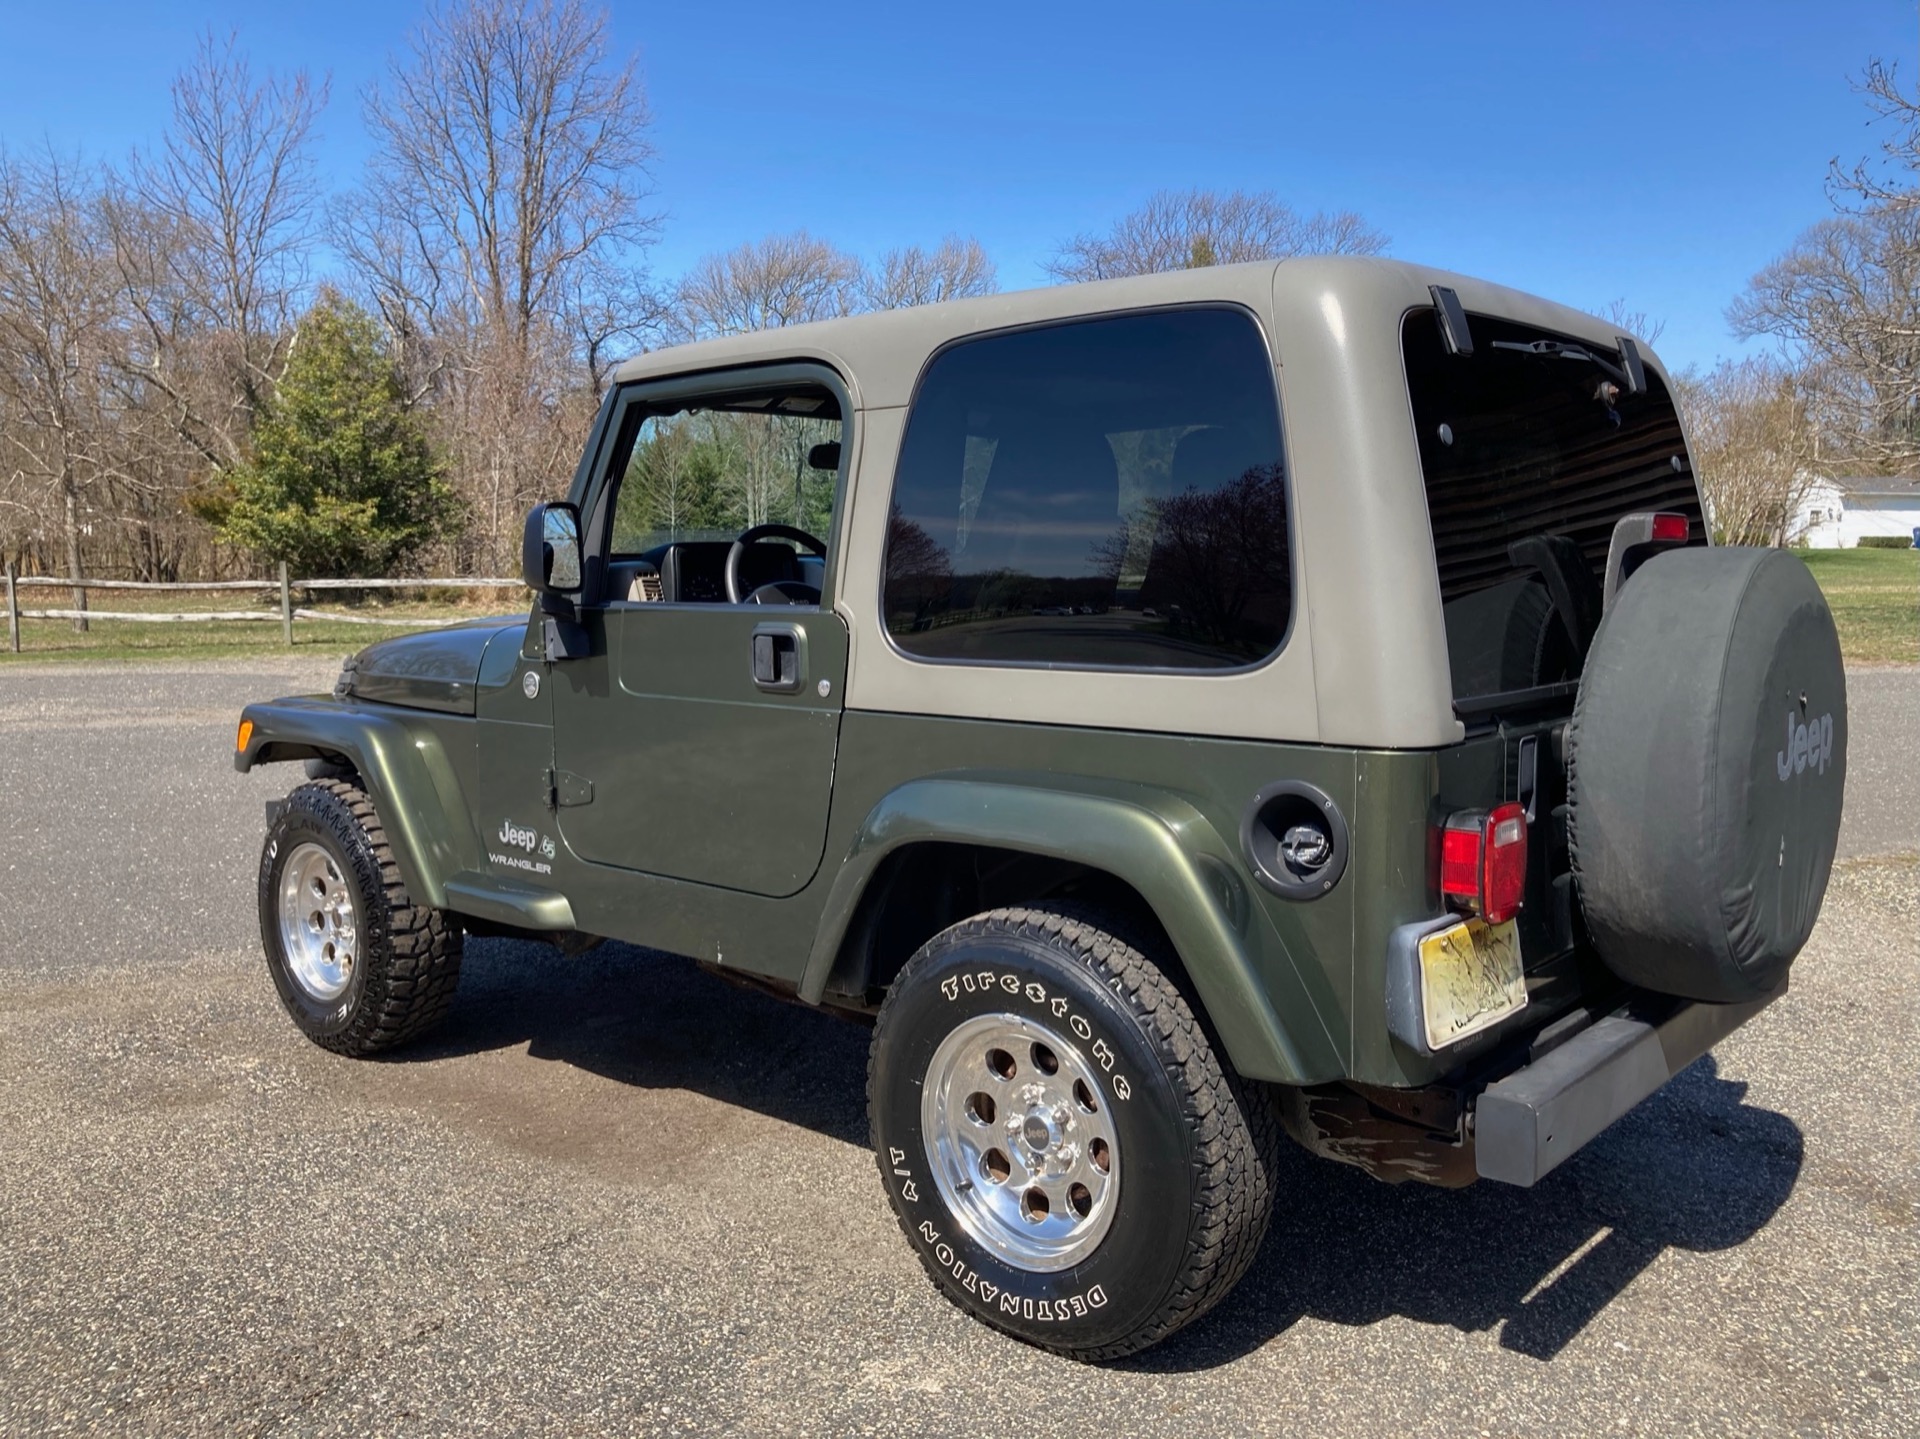 Used 2006 Jeep Wrangler 65th Anniversary Edition X For Sale ($13,900) | Legend Leasing Stock #60258 2006 Jeep Wrangler 65th Anniversary Edition Specs